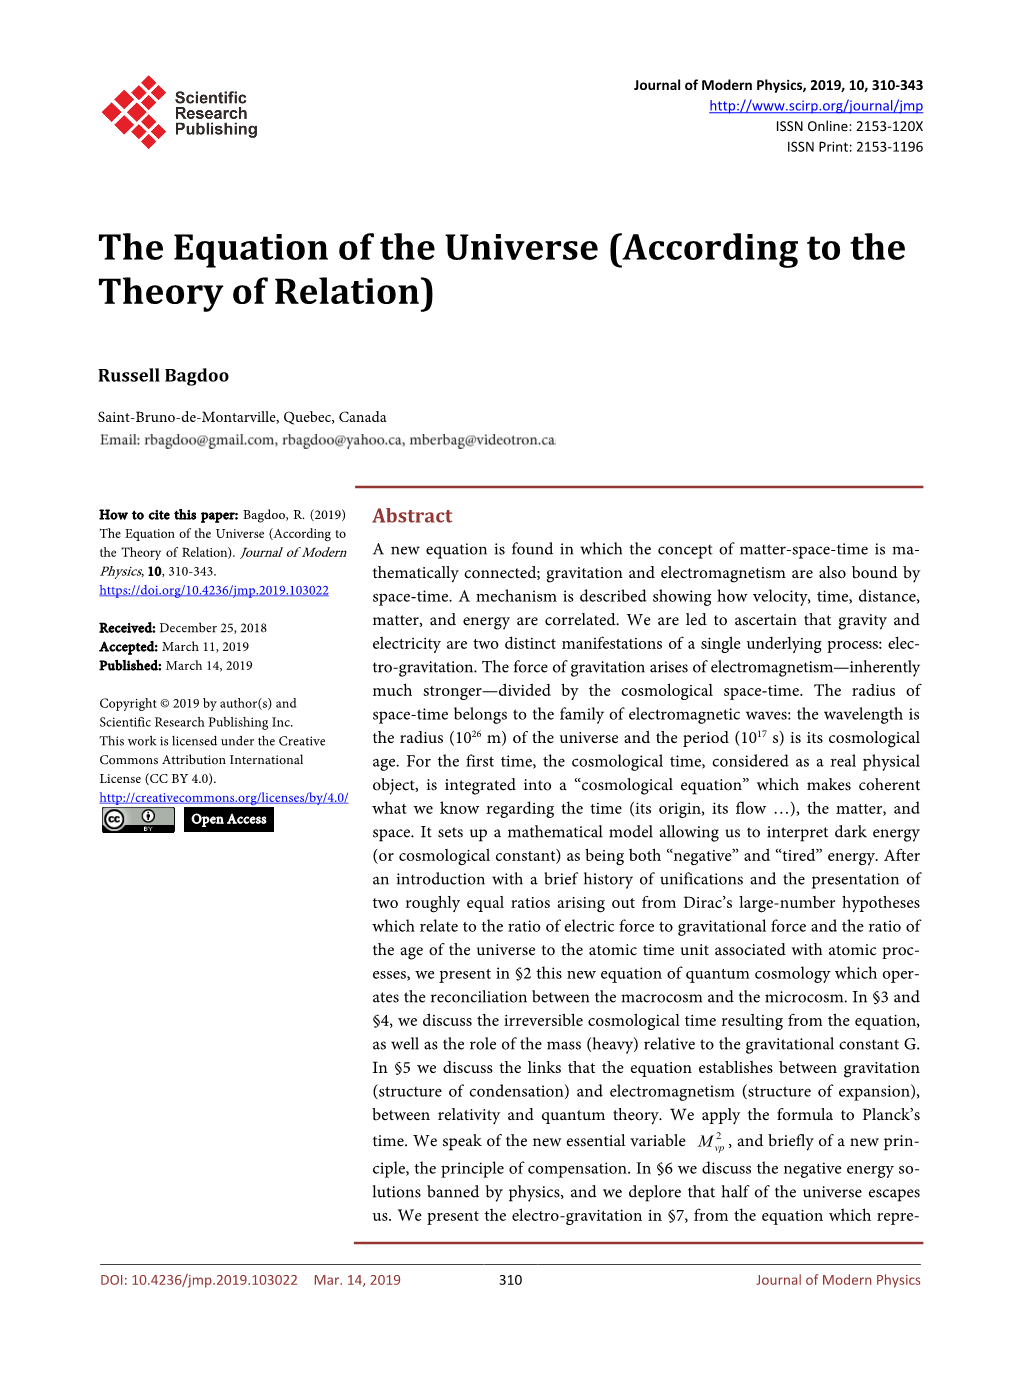 The Equation of the Universe (According to the Theory of Relation)